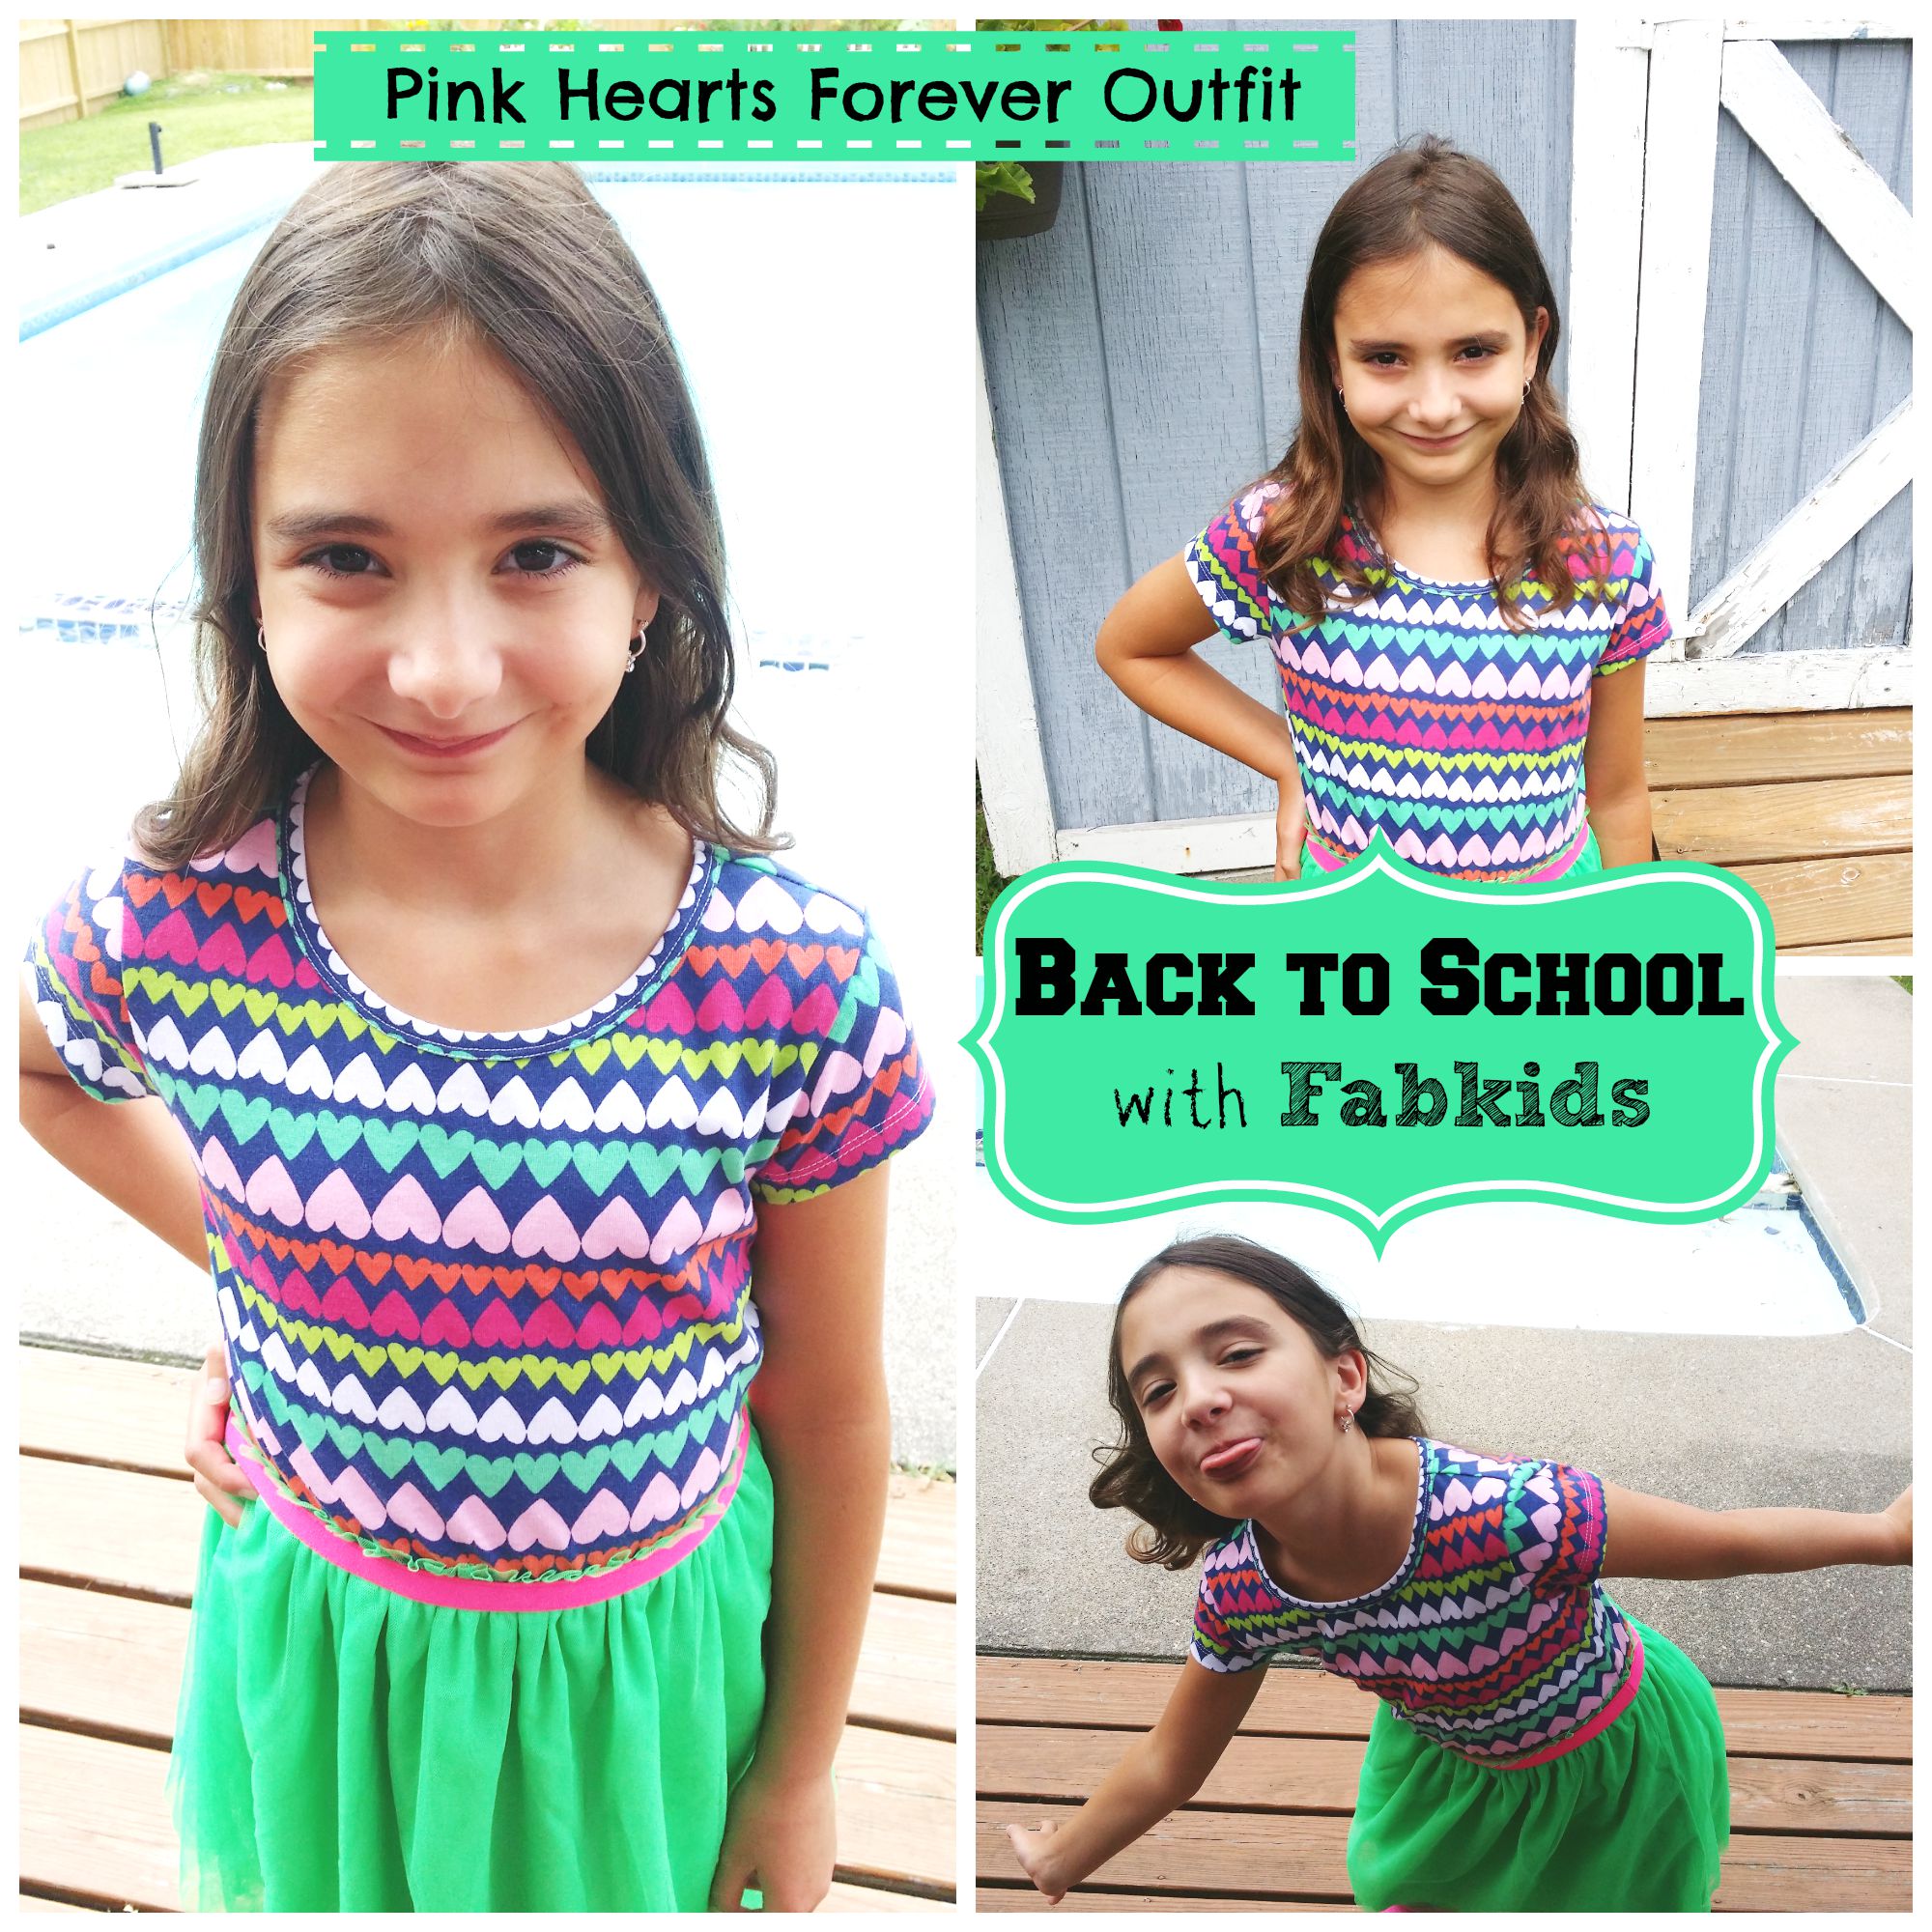 Fabkids Pink Hearts Forever Outfit for Back To School #FabKidsBackToSchool